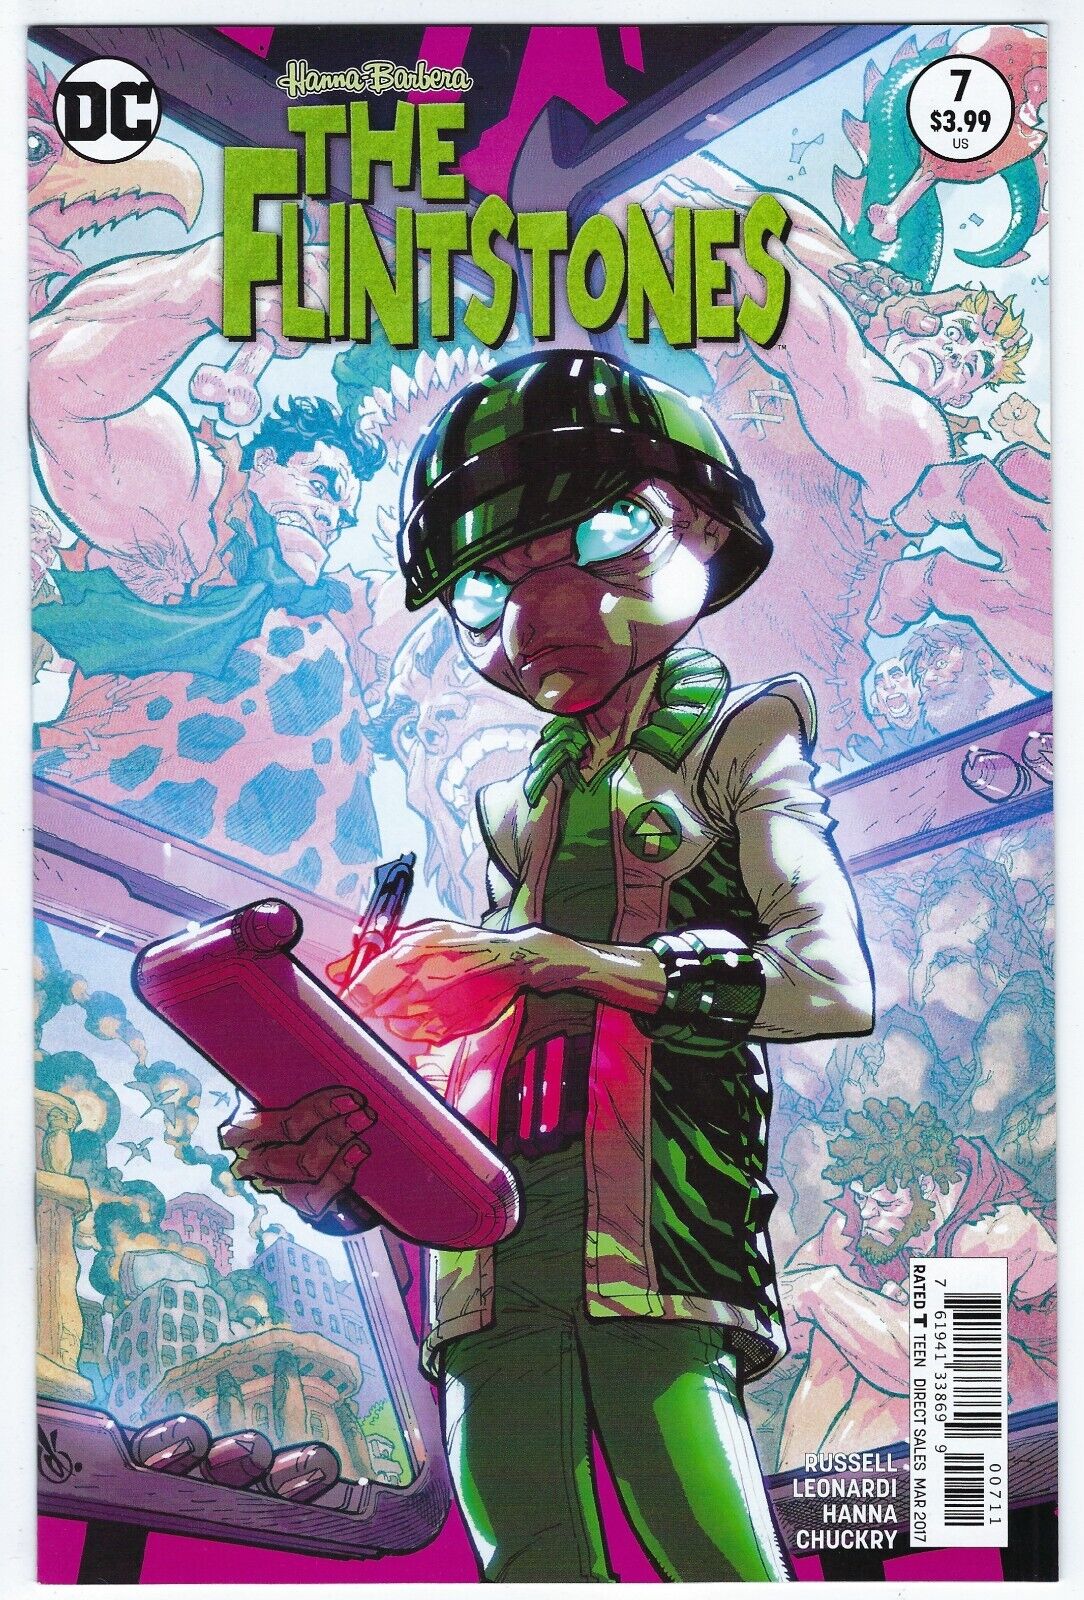 DC Comics THE FLINTSTONES #7 first printing cover A